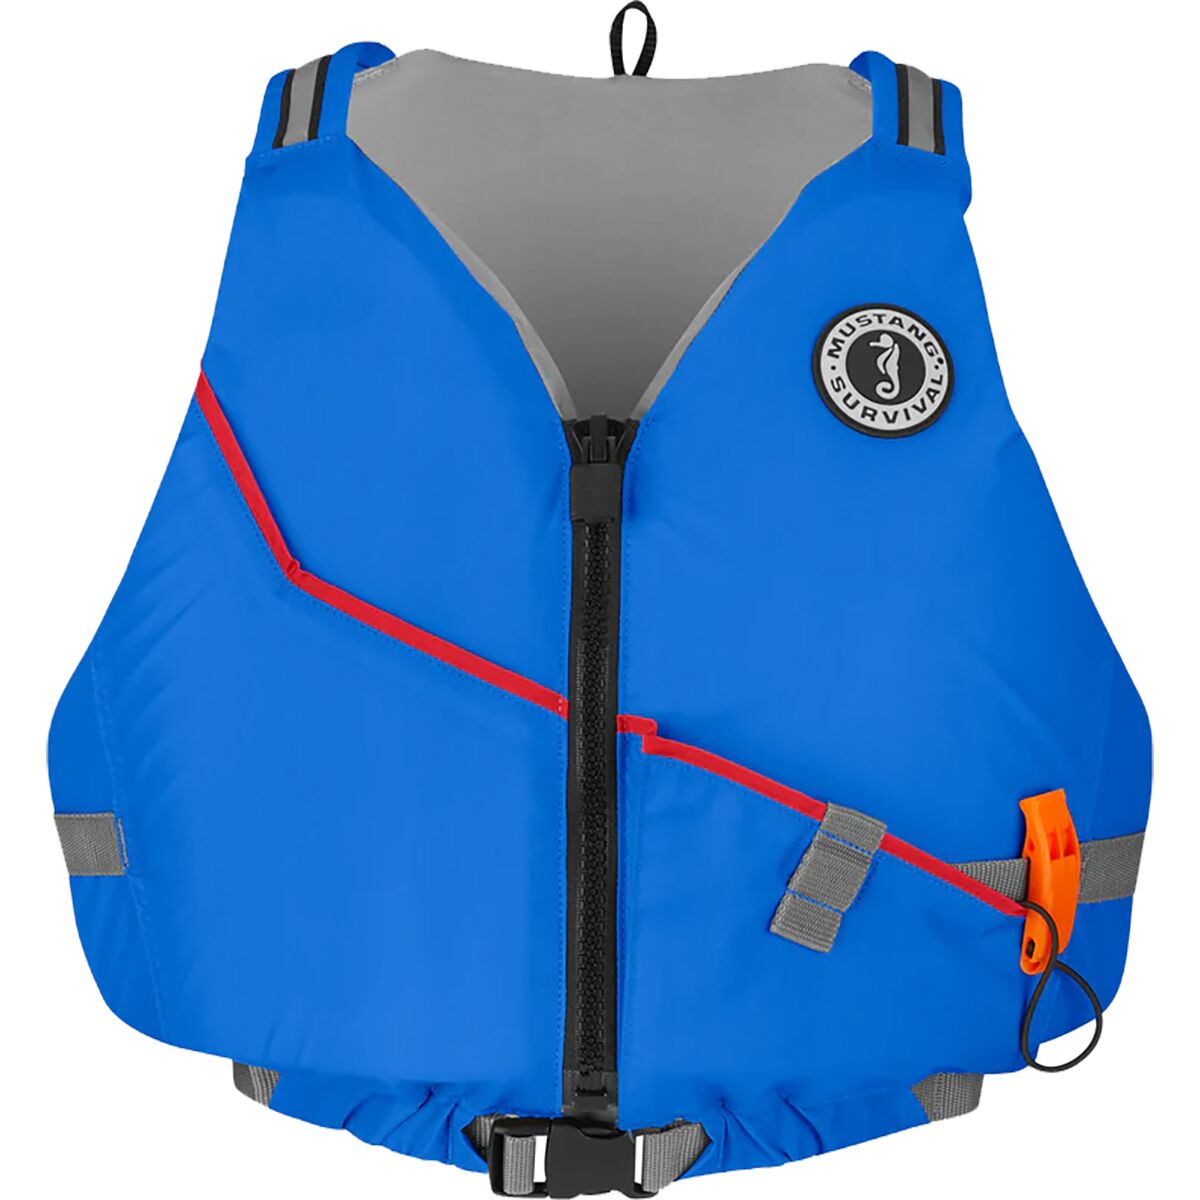 Mustang Survival Journey Personal Flotation Device